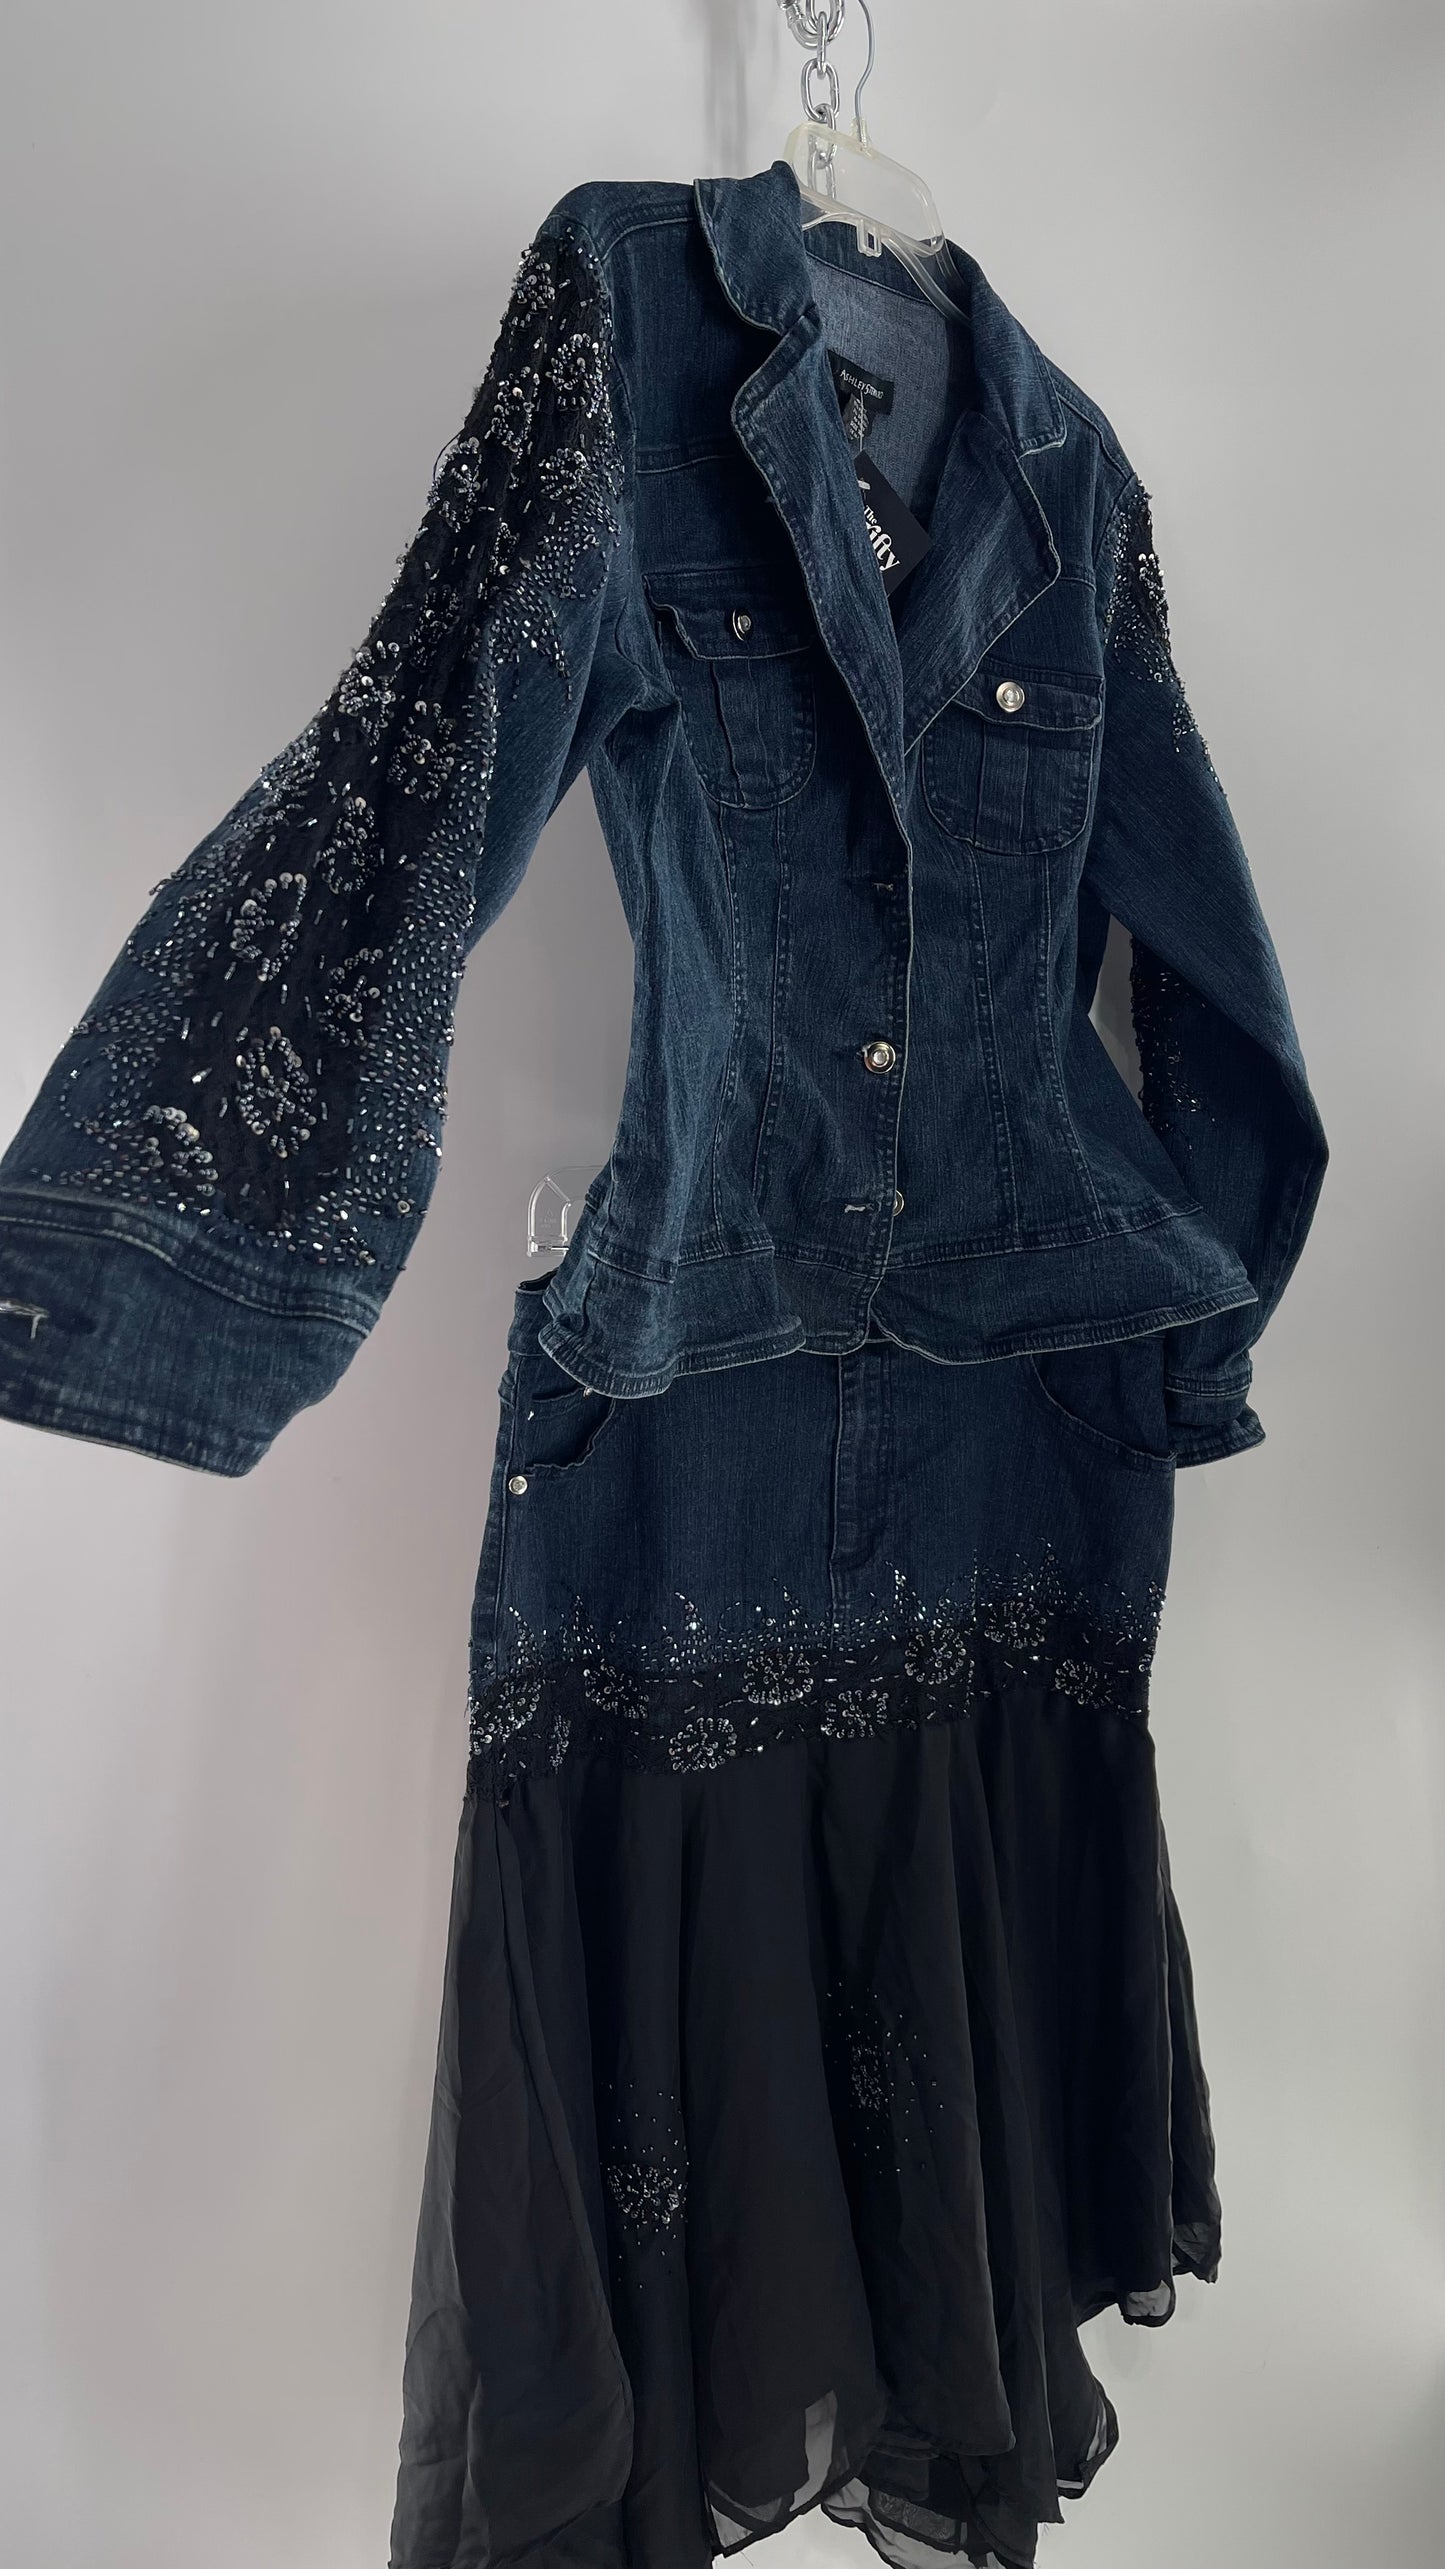 Vintage Ashley Stewart Denim Skirt and Button Up Set with Black Embroidered and Beaded Lace Details + Handkerchief Skirt (16W)